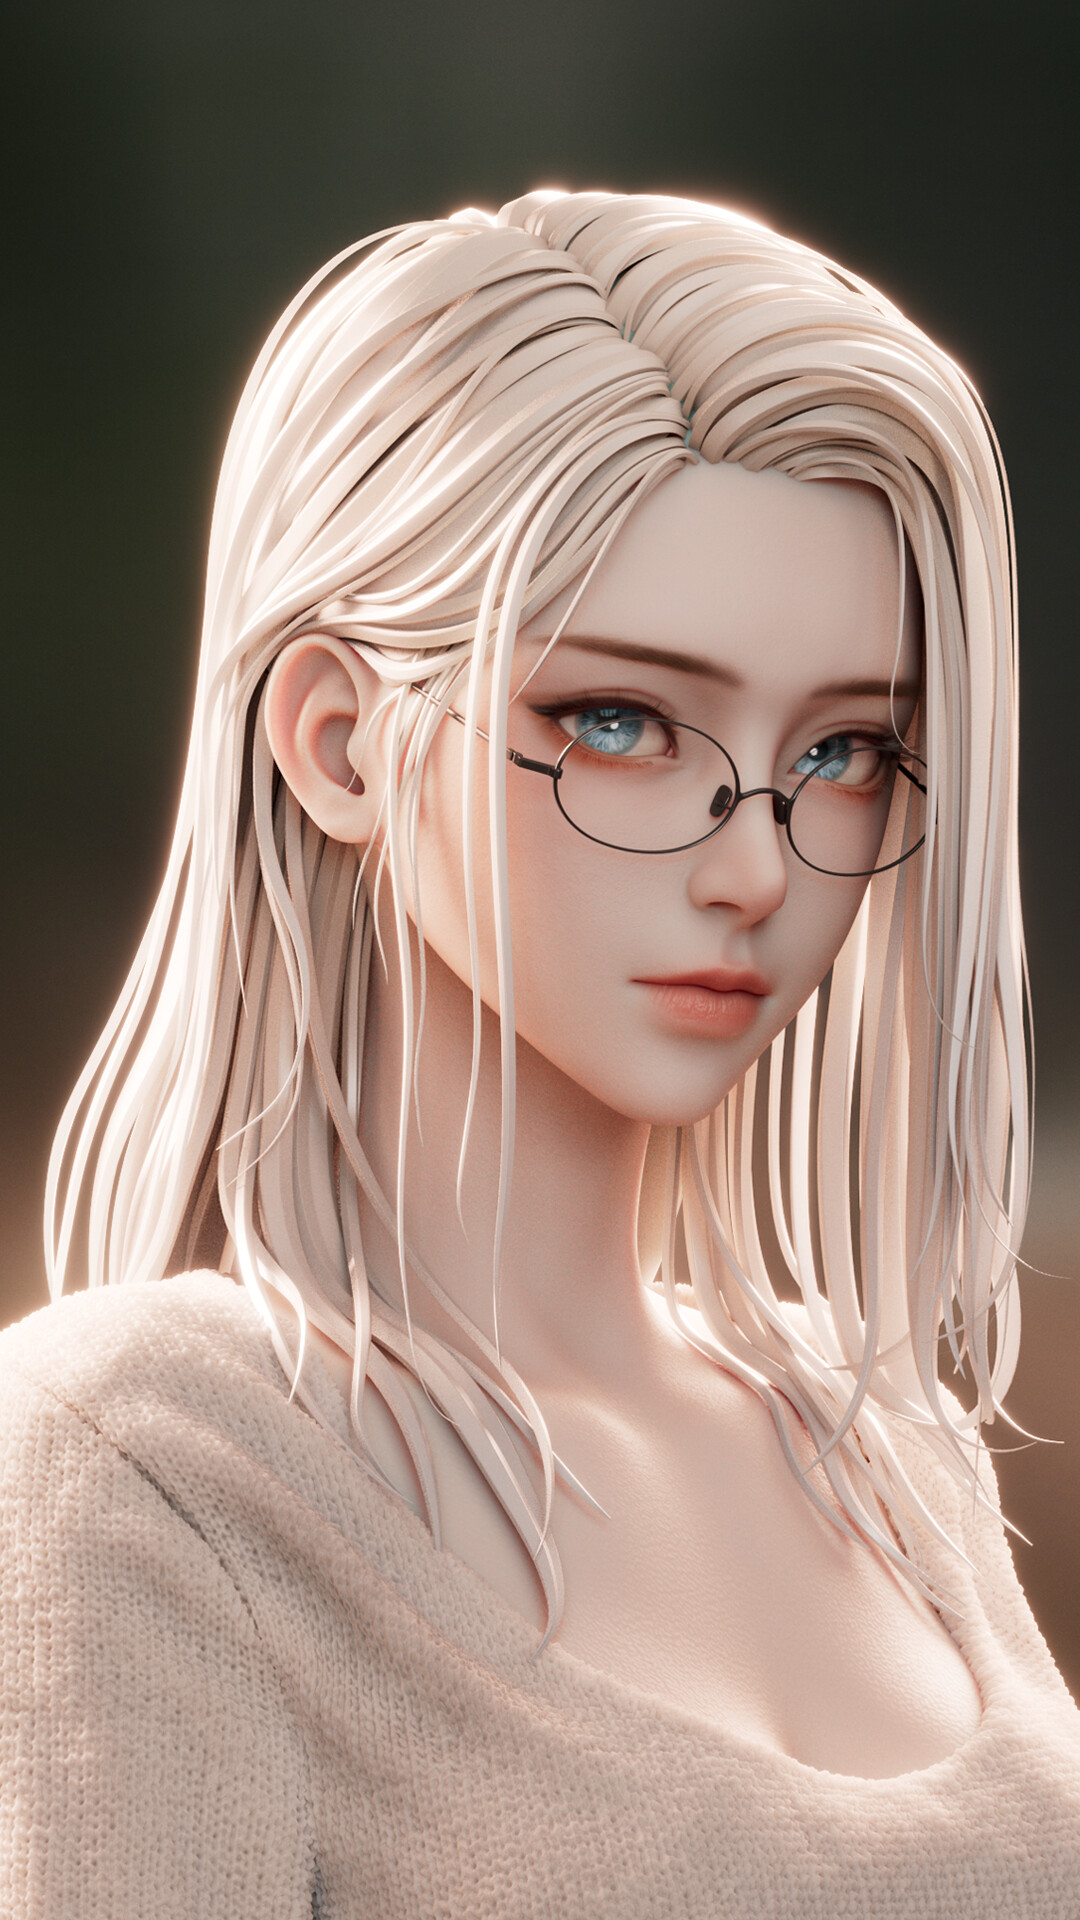 General 1080x1920 Zihao Zhou women blonde portrait CGI glasses women with glasses simple background face closed mouth long hair blue eyes looking at viewer Asian portrait display backlighting digital art